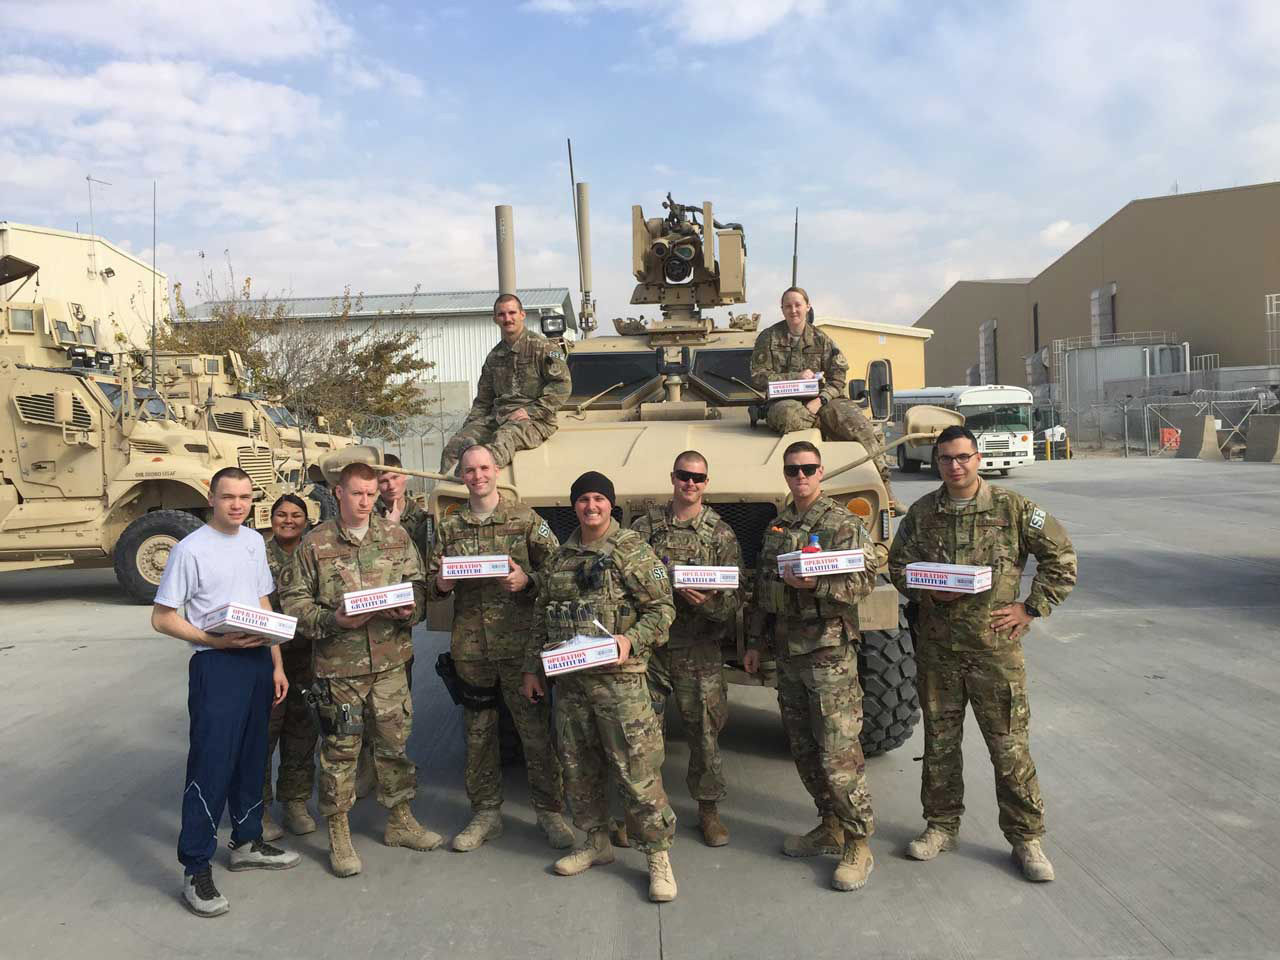 The packages are put together by volunteers with Operation Gratitude, part of a national non-profit that sends thousands of care packaages to U.S. service members deployed overseas. (Courtesy Operation Troop Treats)